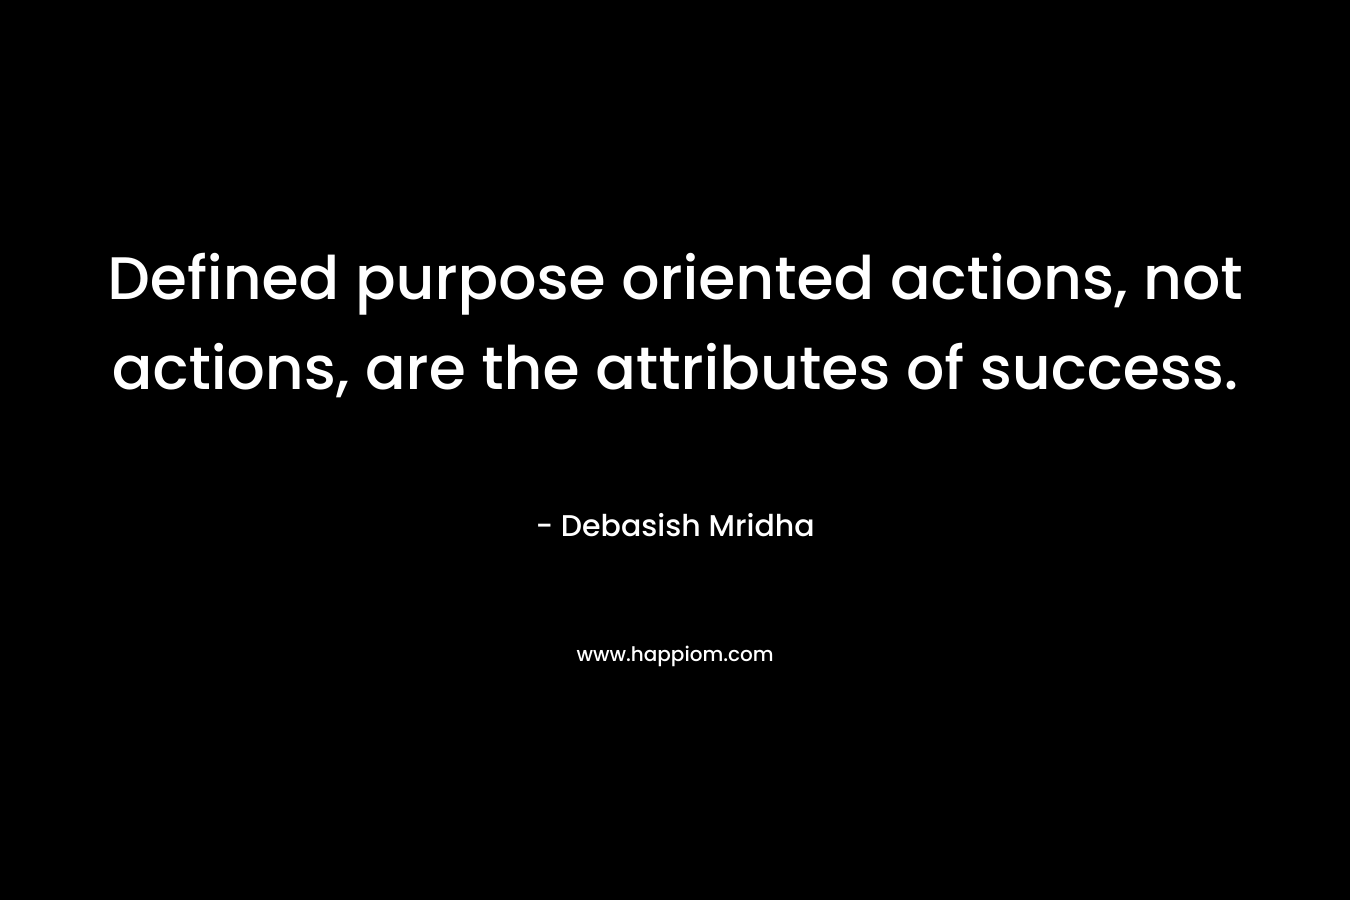 Defined purpose oriented actions, not actions, are the attributes of success.